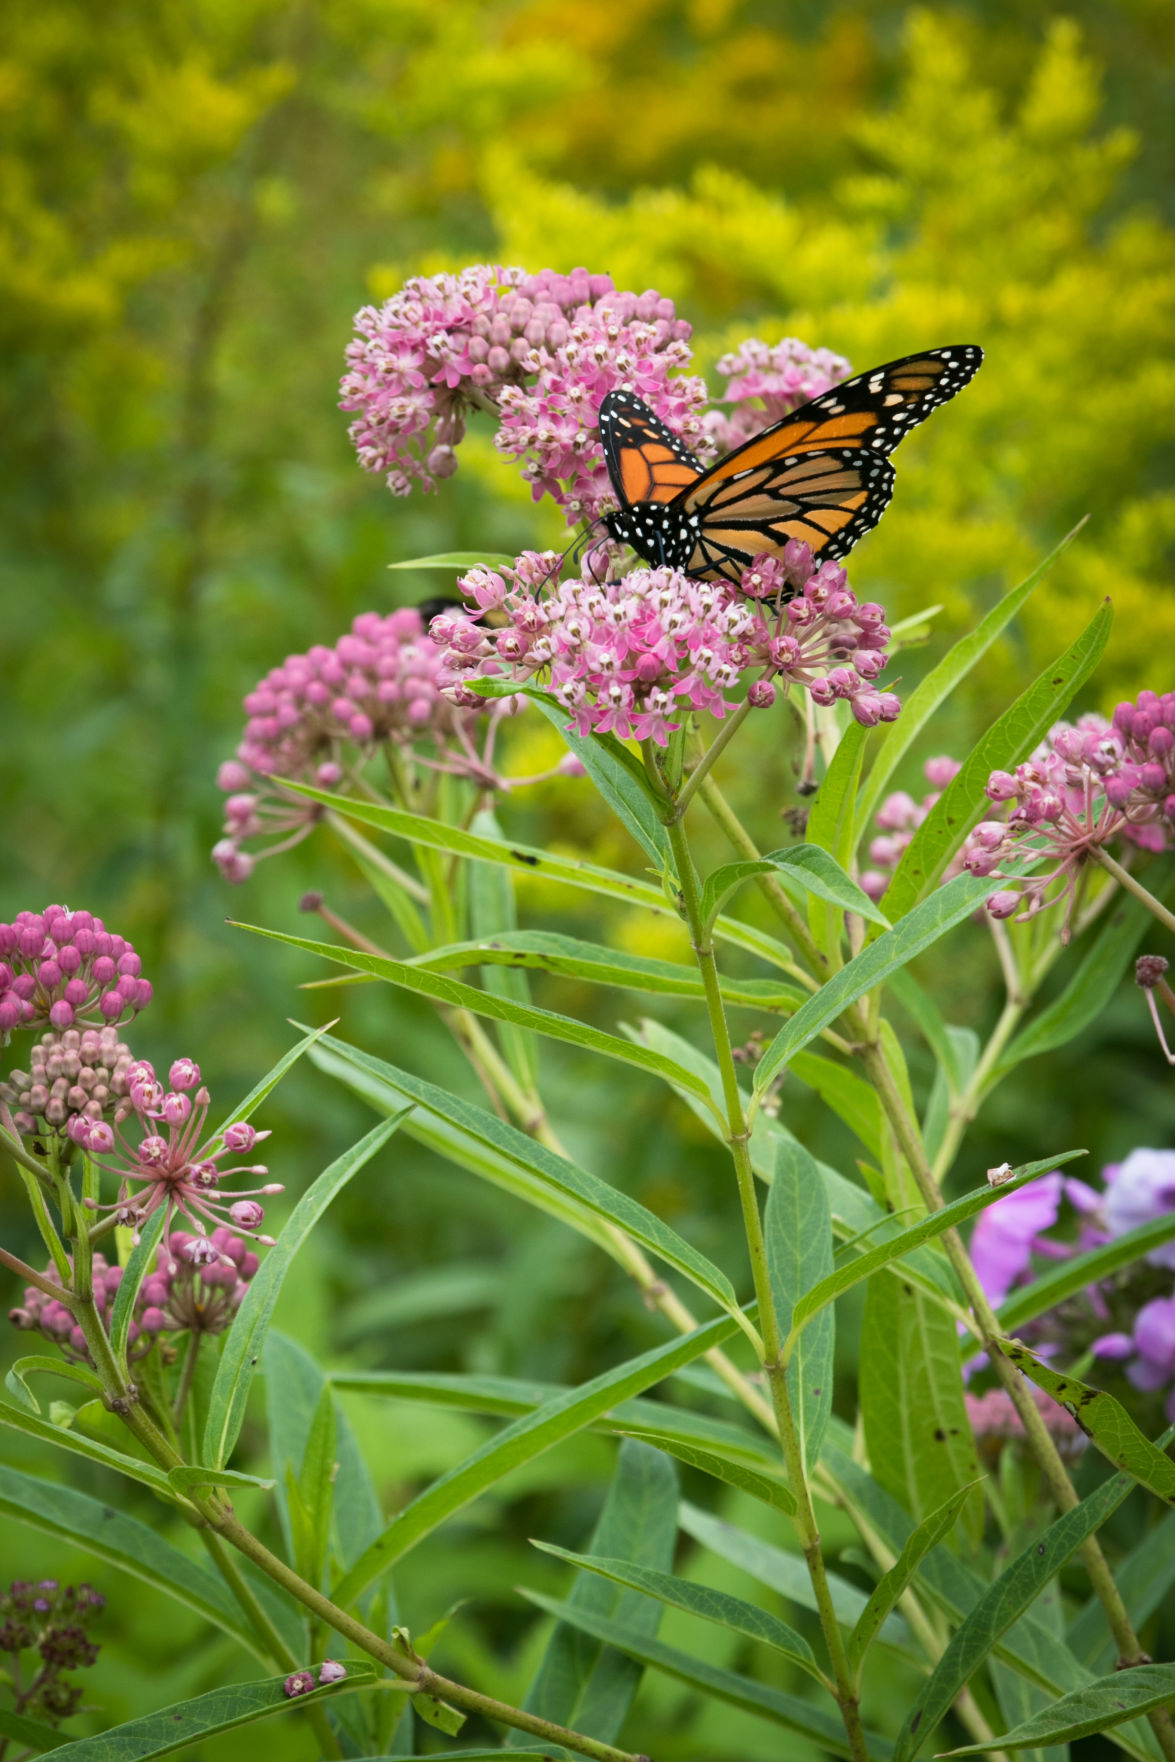 Growing Common Milkweed Instructions and Video